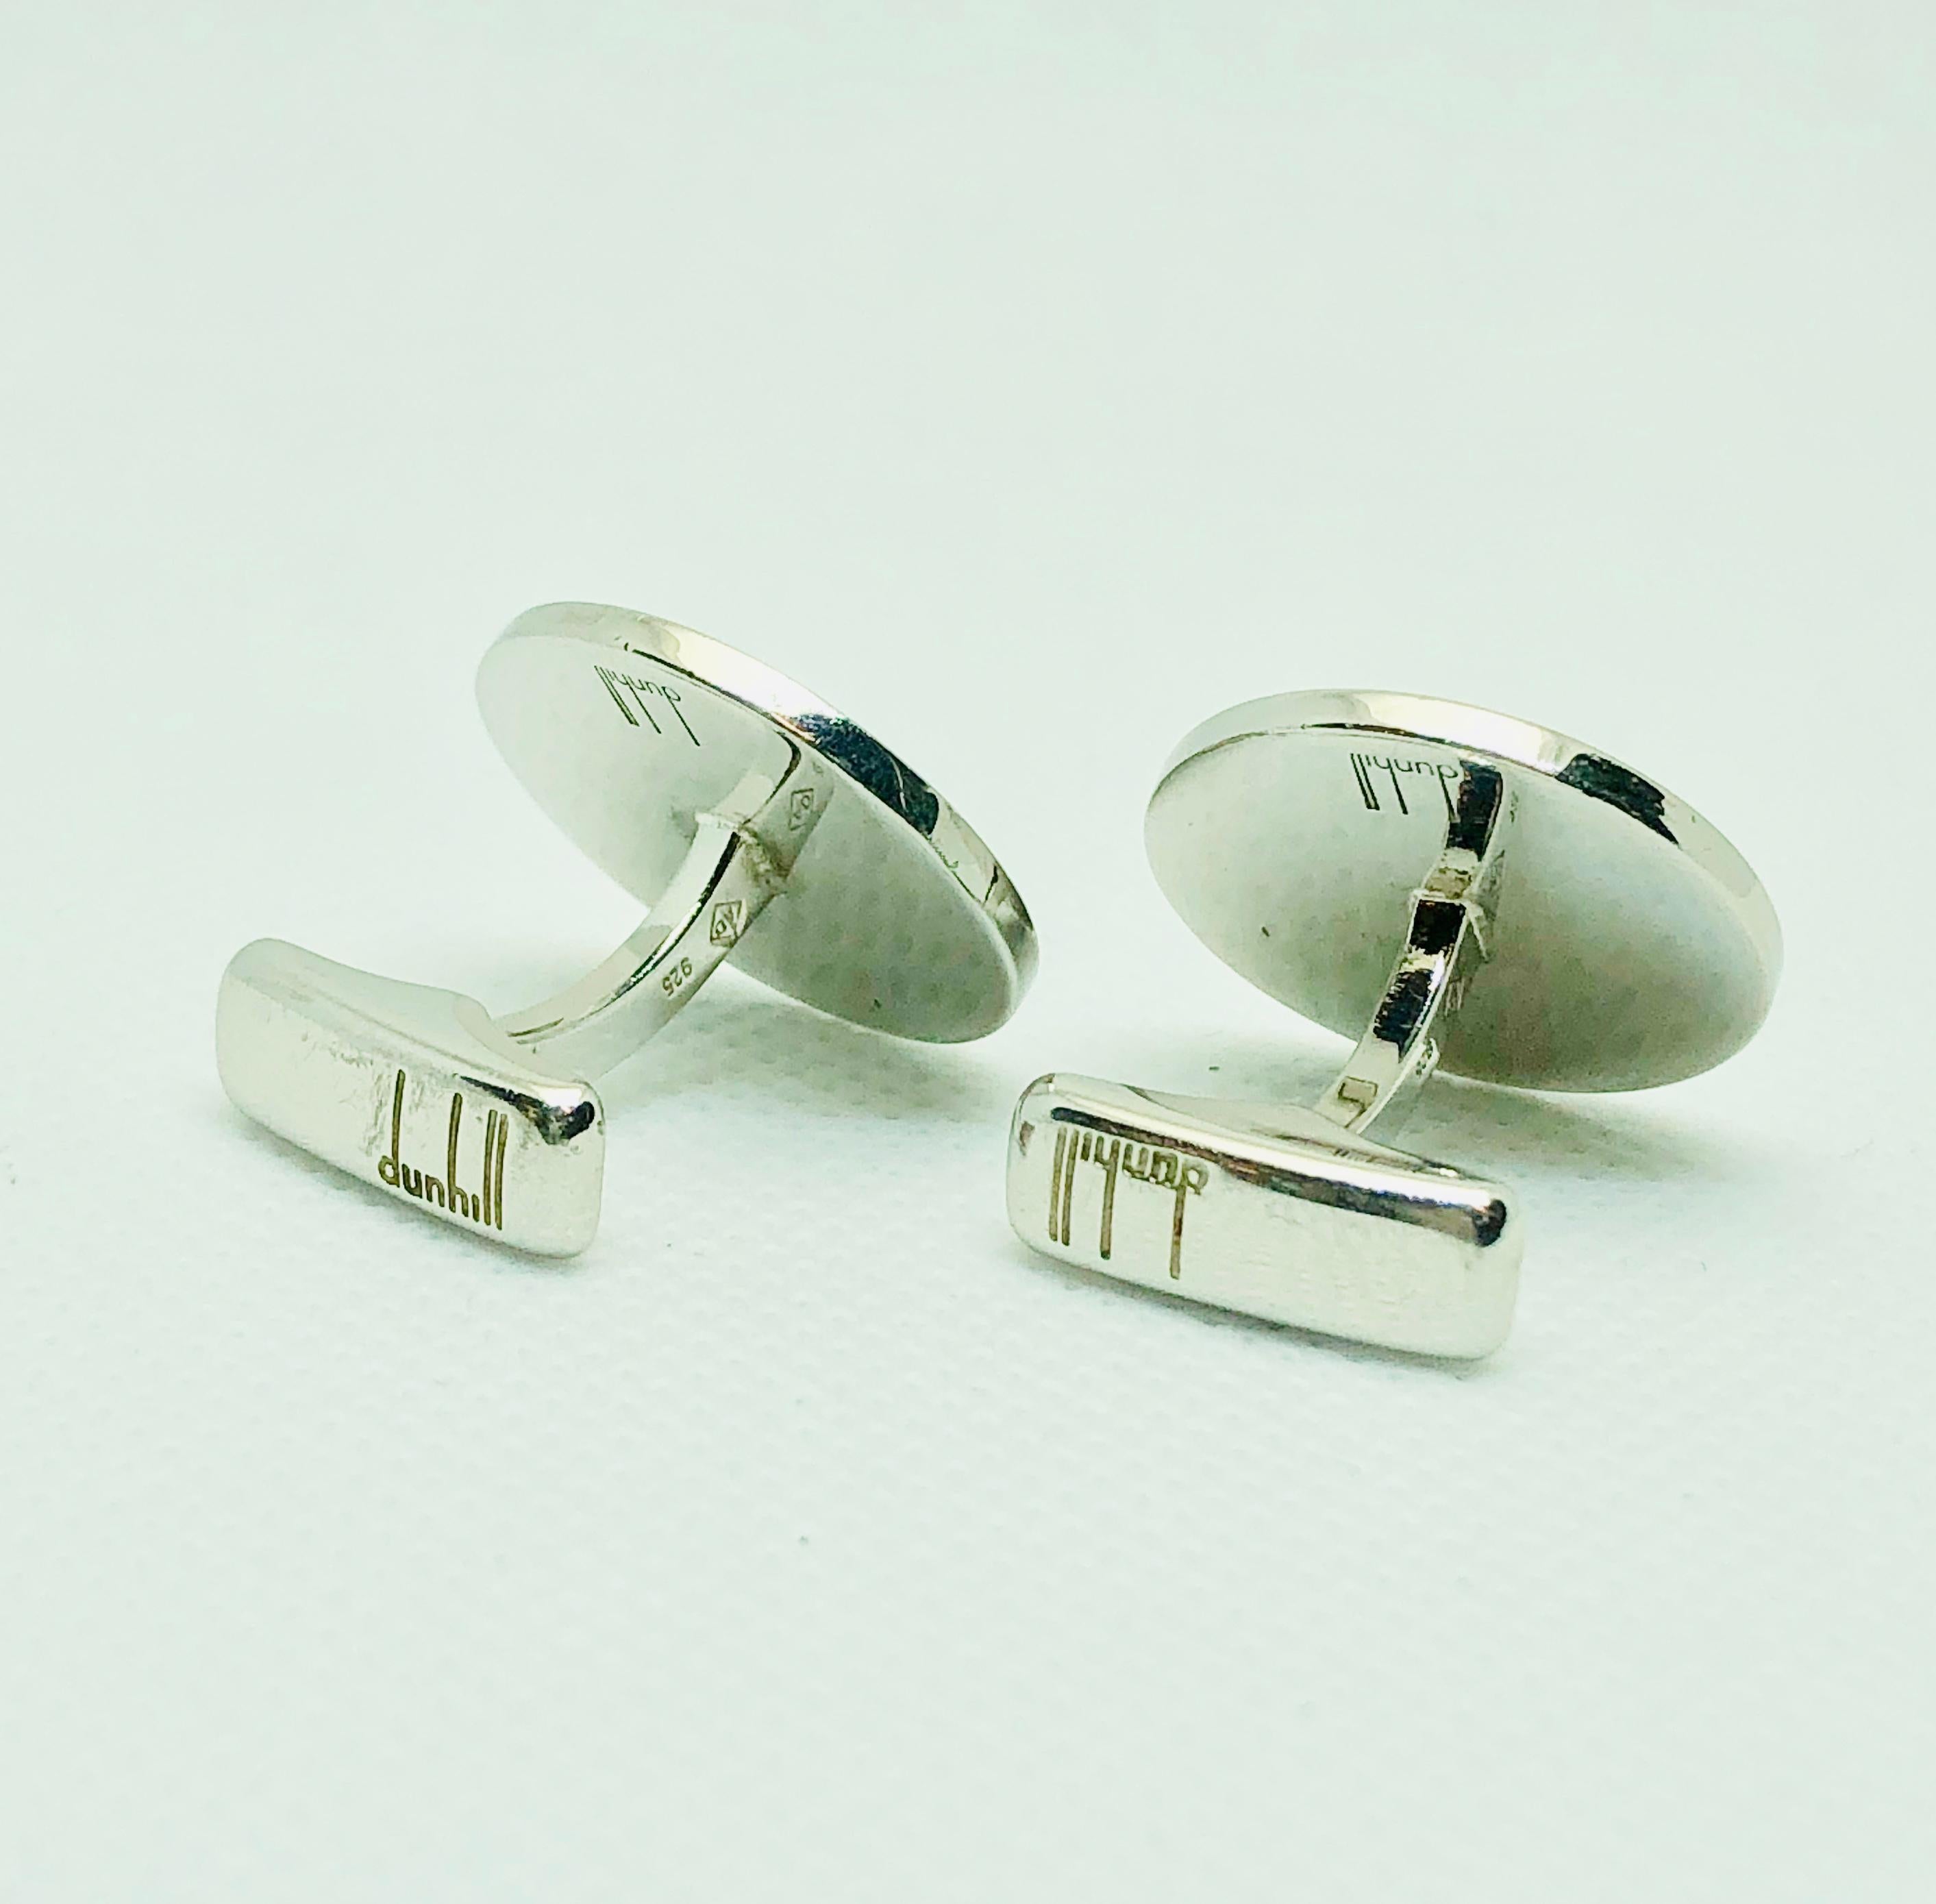 premium quality alfred dunhill cufflinks